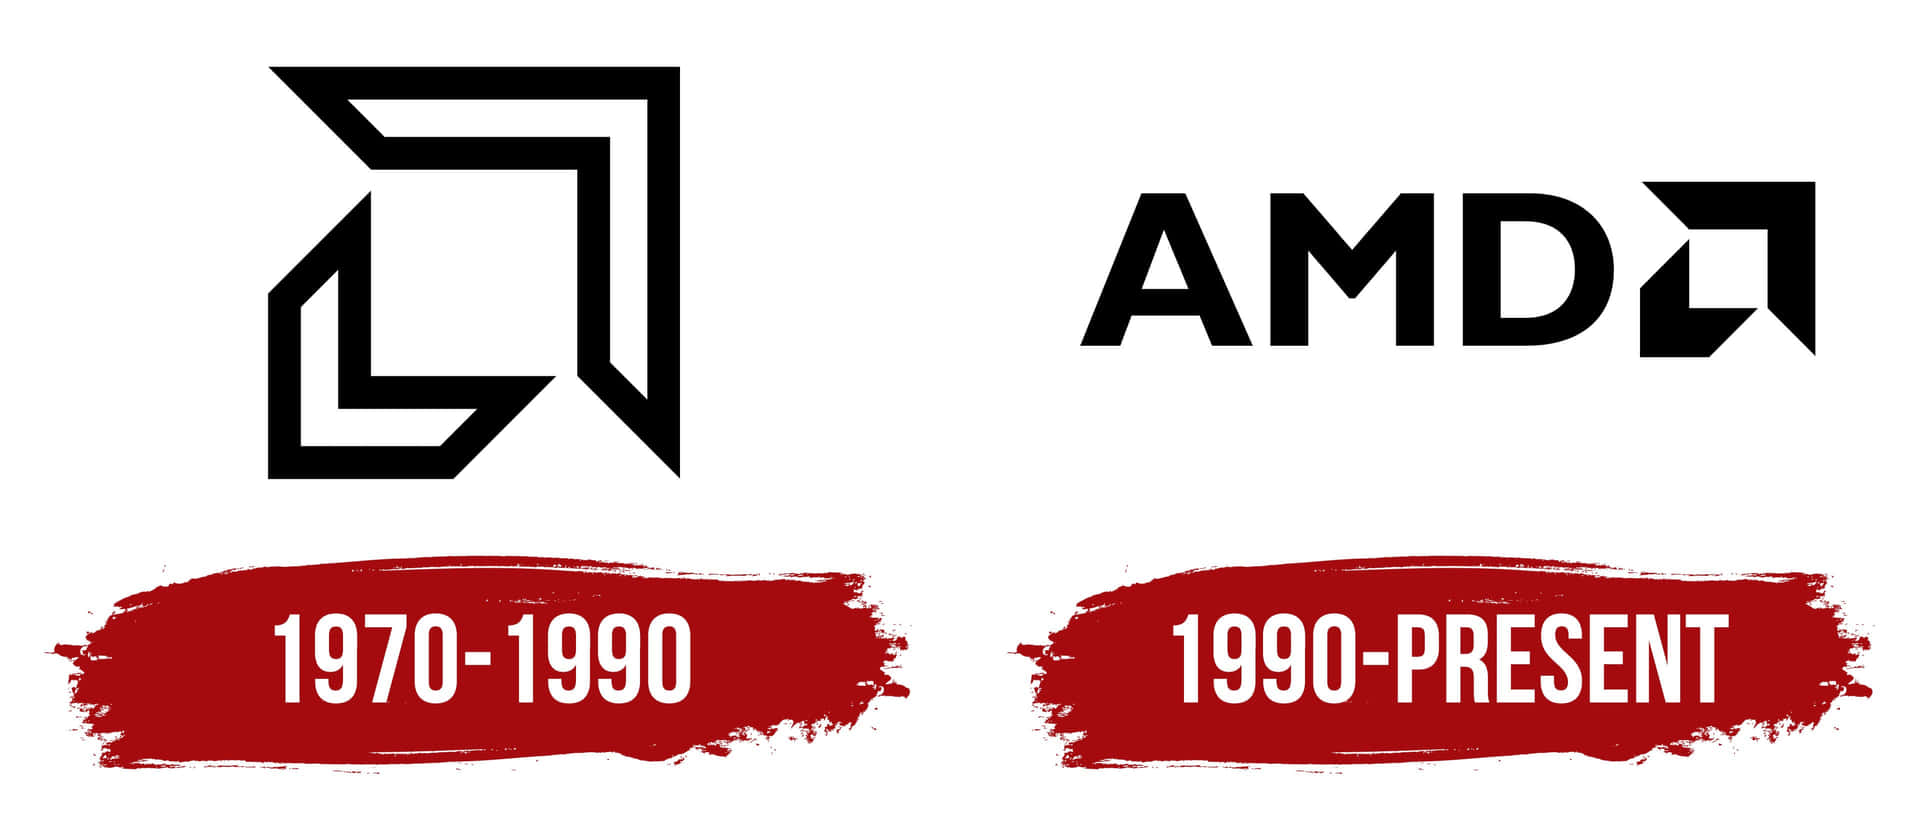 Amd Logos From 1970 To Present